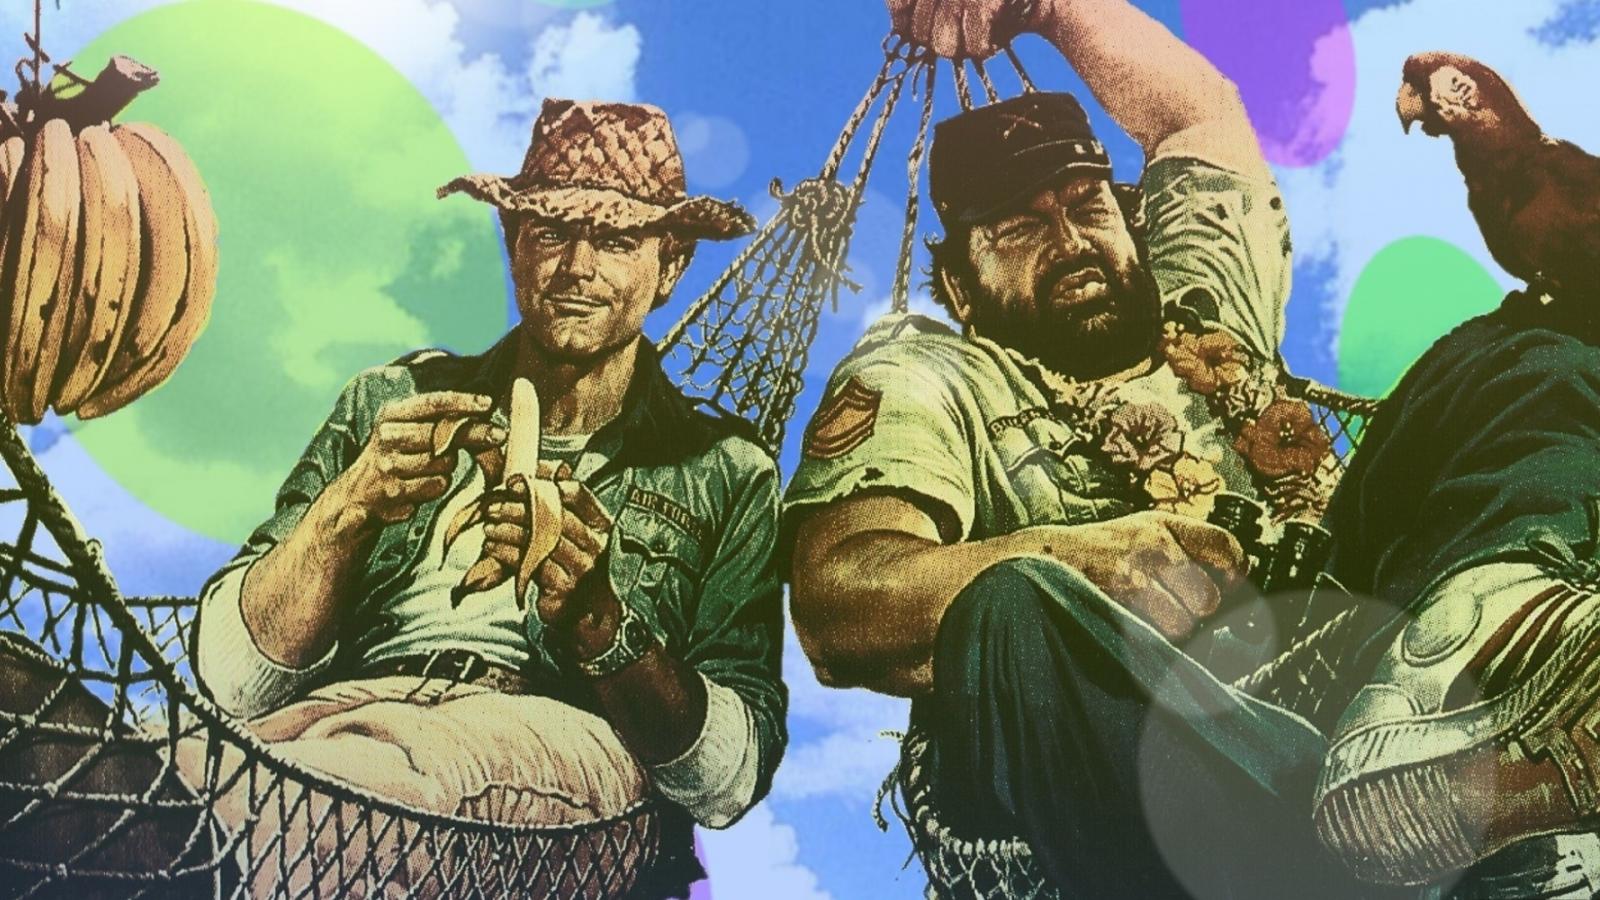 movies_stars_actors_terence_hill_widescreen_bud_spencer_1600x900_57455.jpg